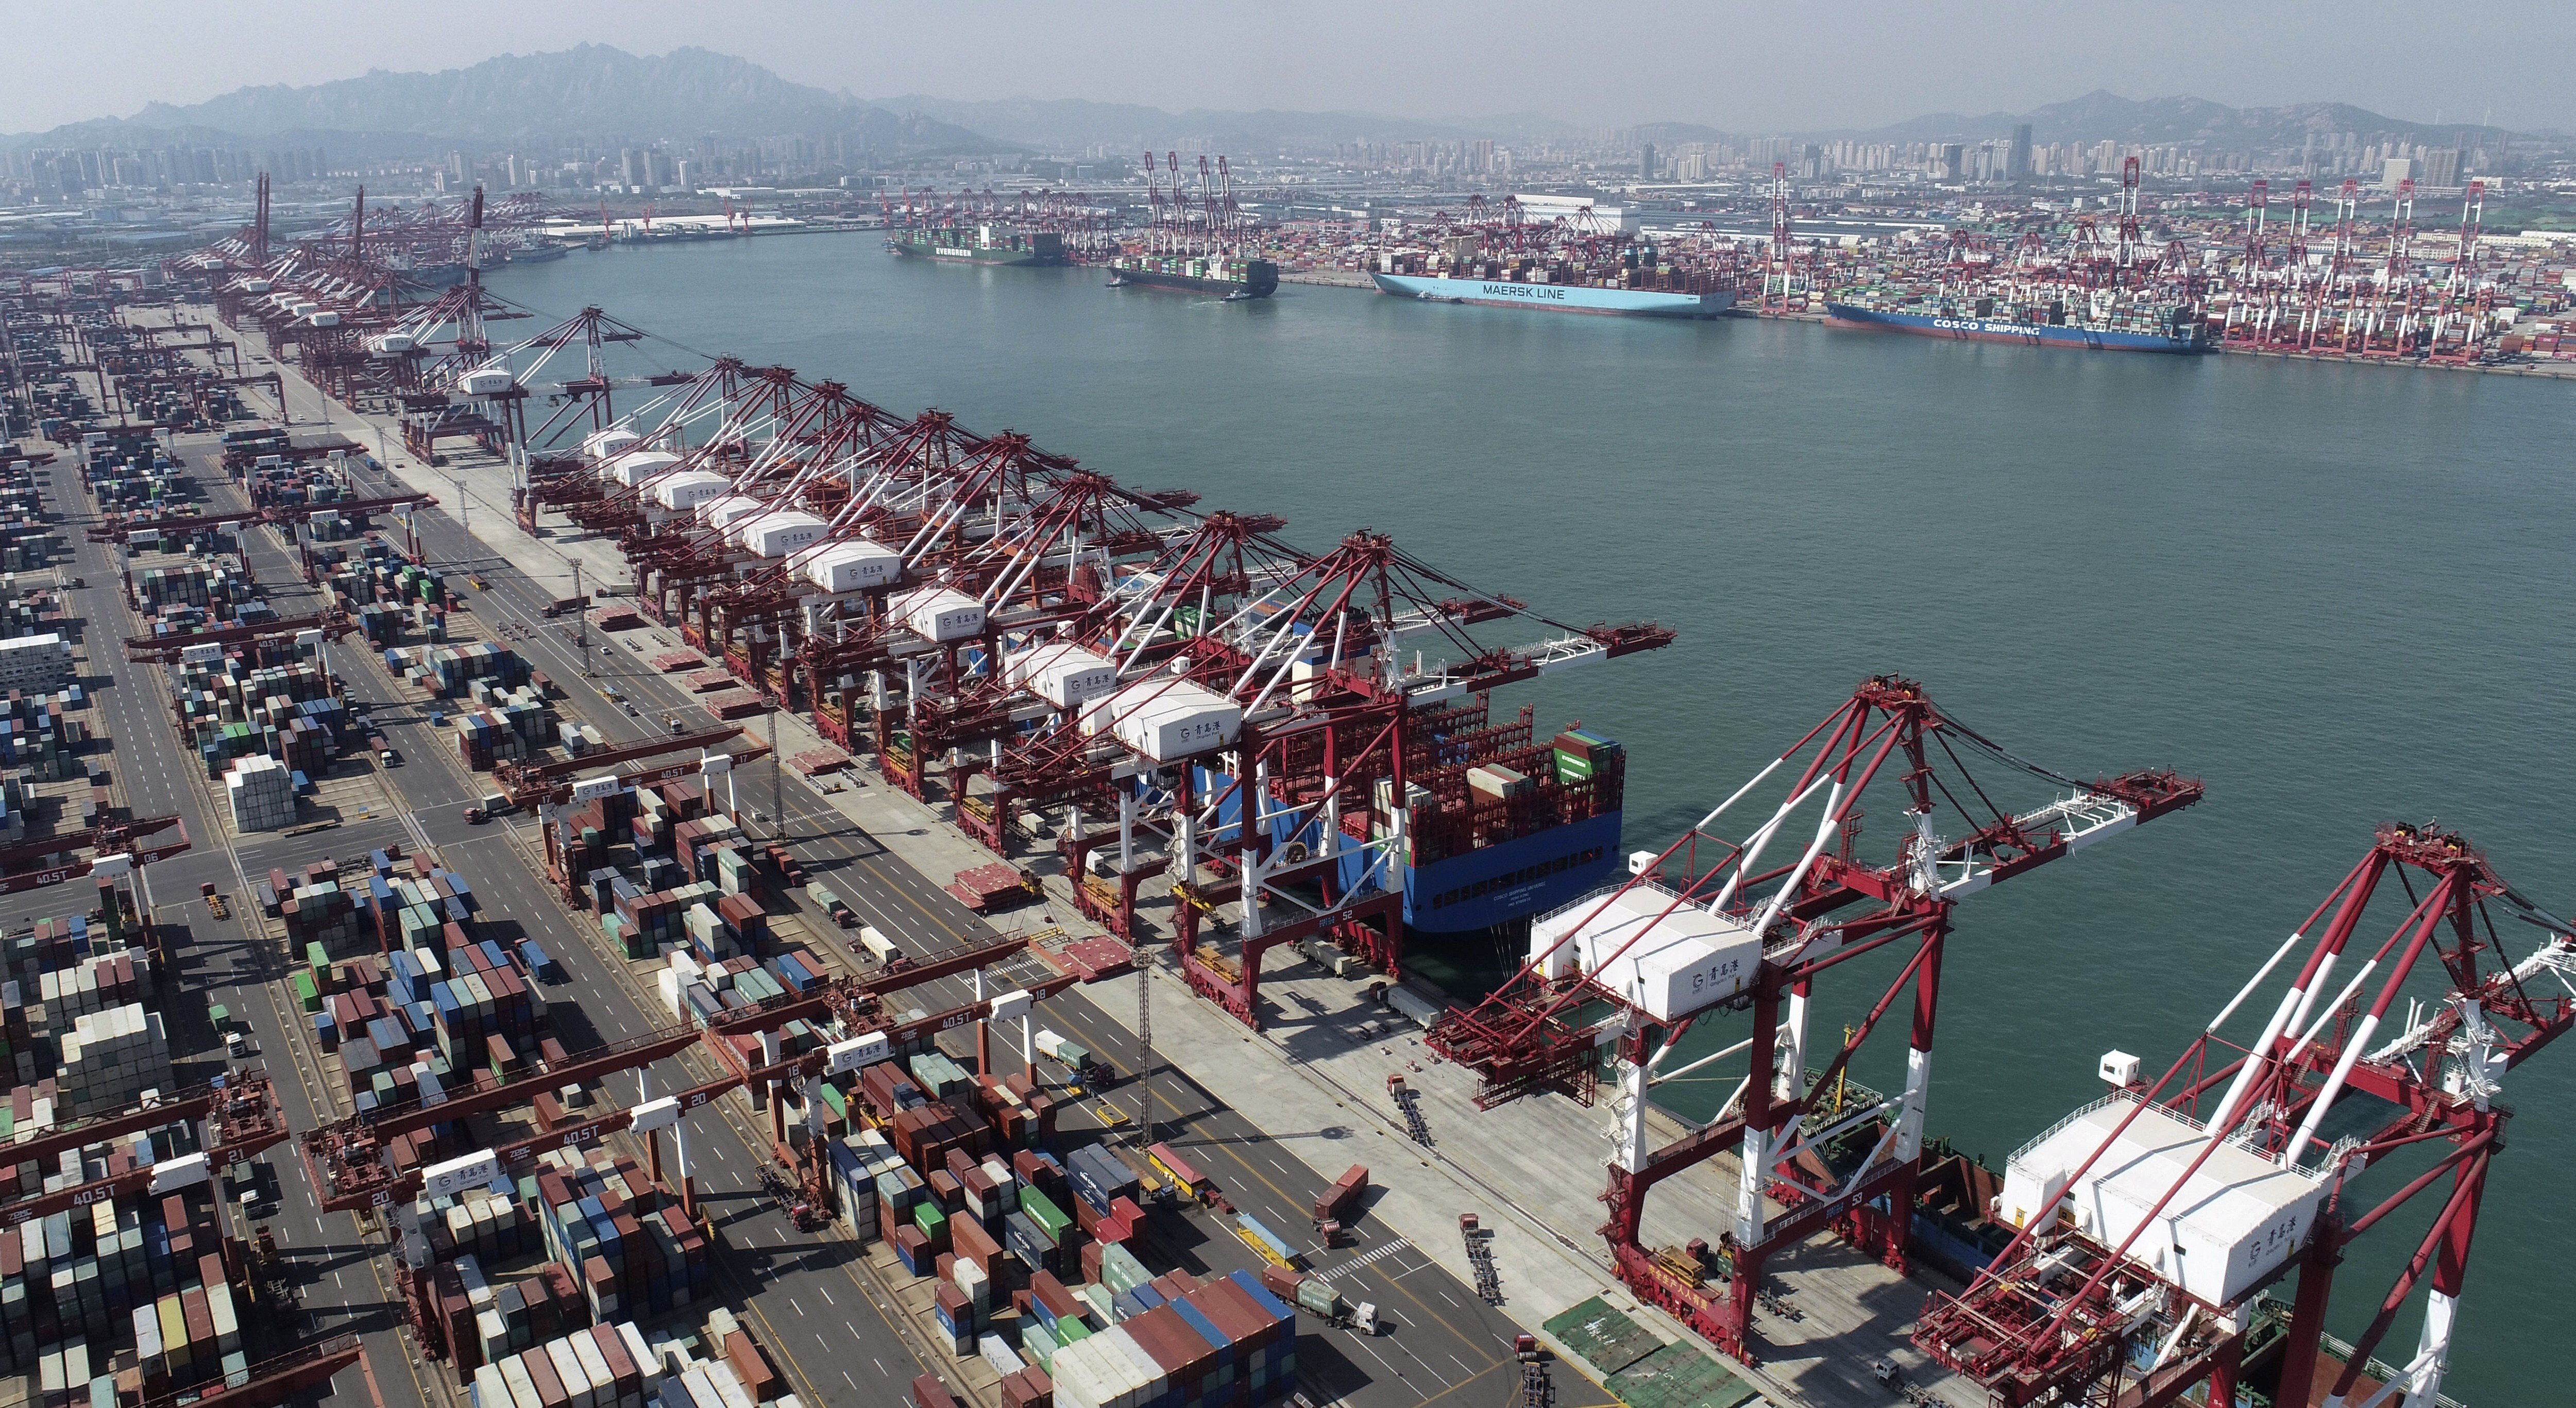 Container ships are docked at a container port in Qingdao in eastern Shandong province on October 8. China’s economy has experienced a rebound in recent months, but its recovery is unlikely to boost the global economy given the recent trend towards deglobalisation. Photo: AP